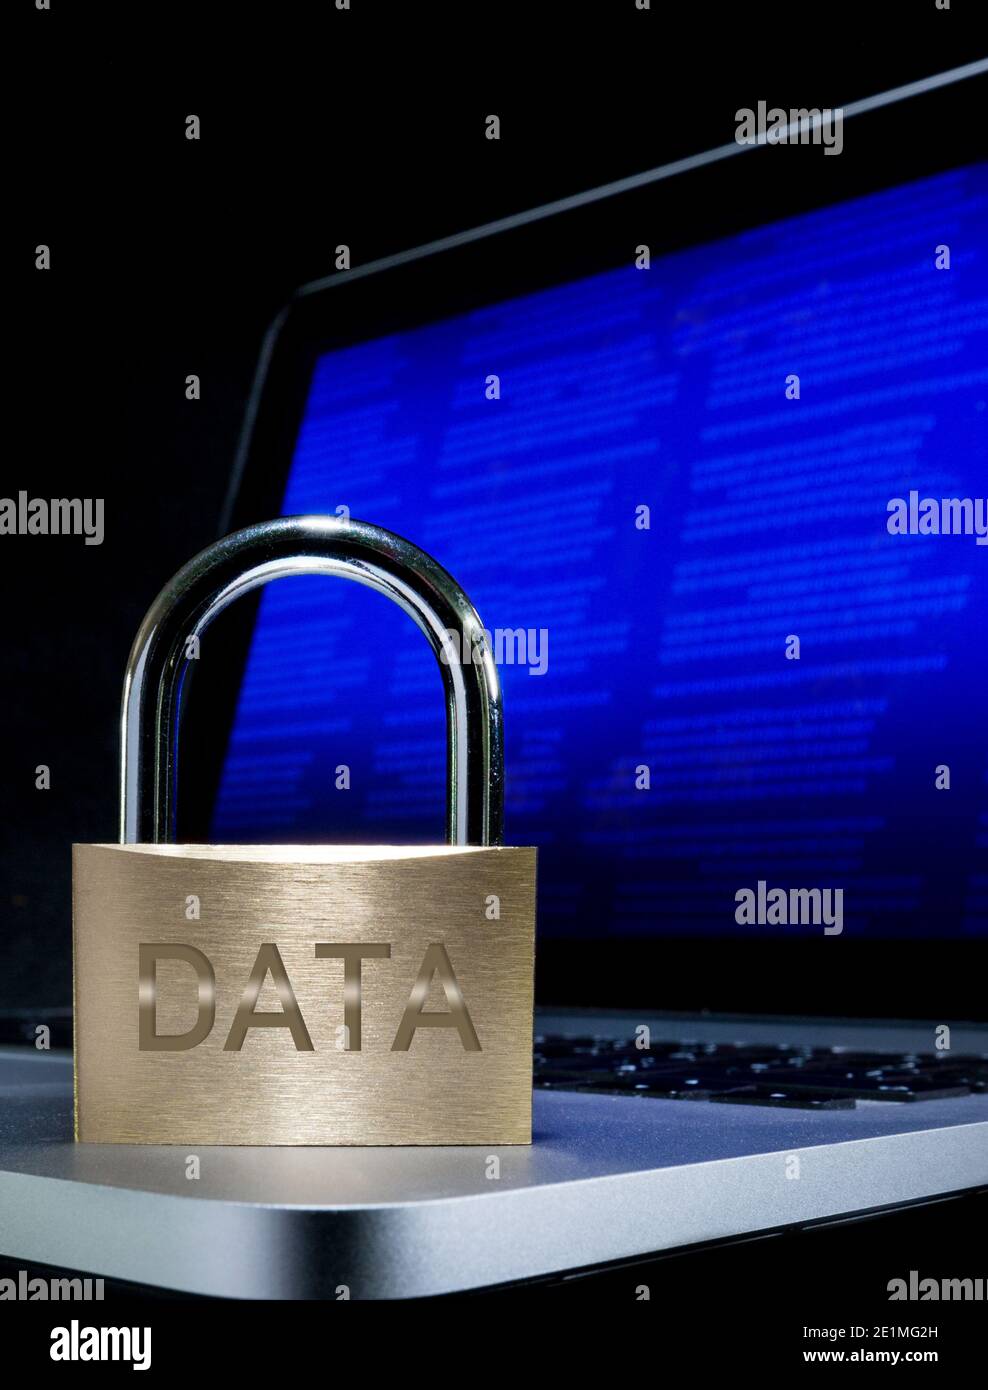 A padlock and computer, online security concept image. Stock Photo